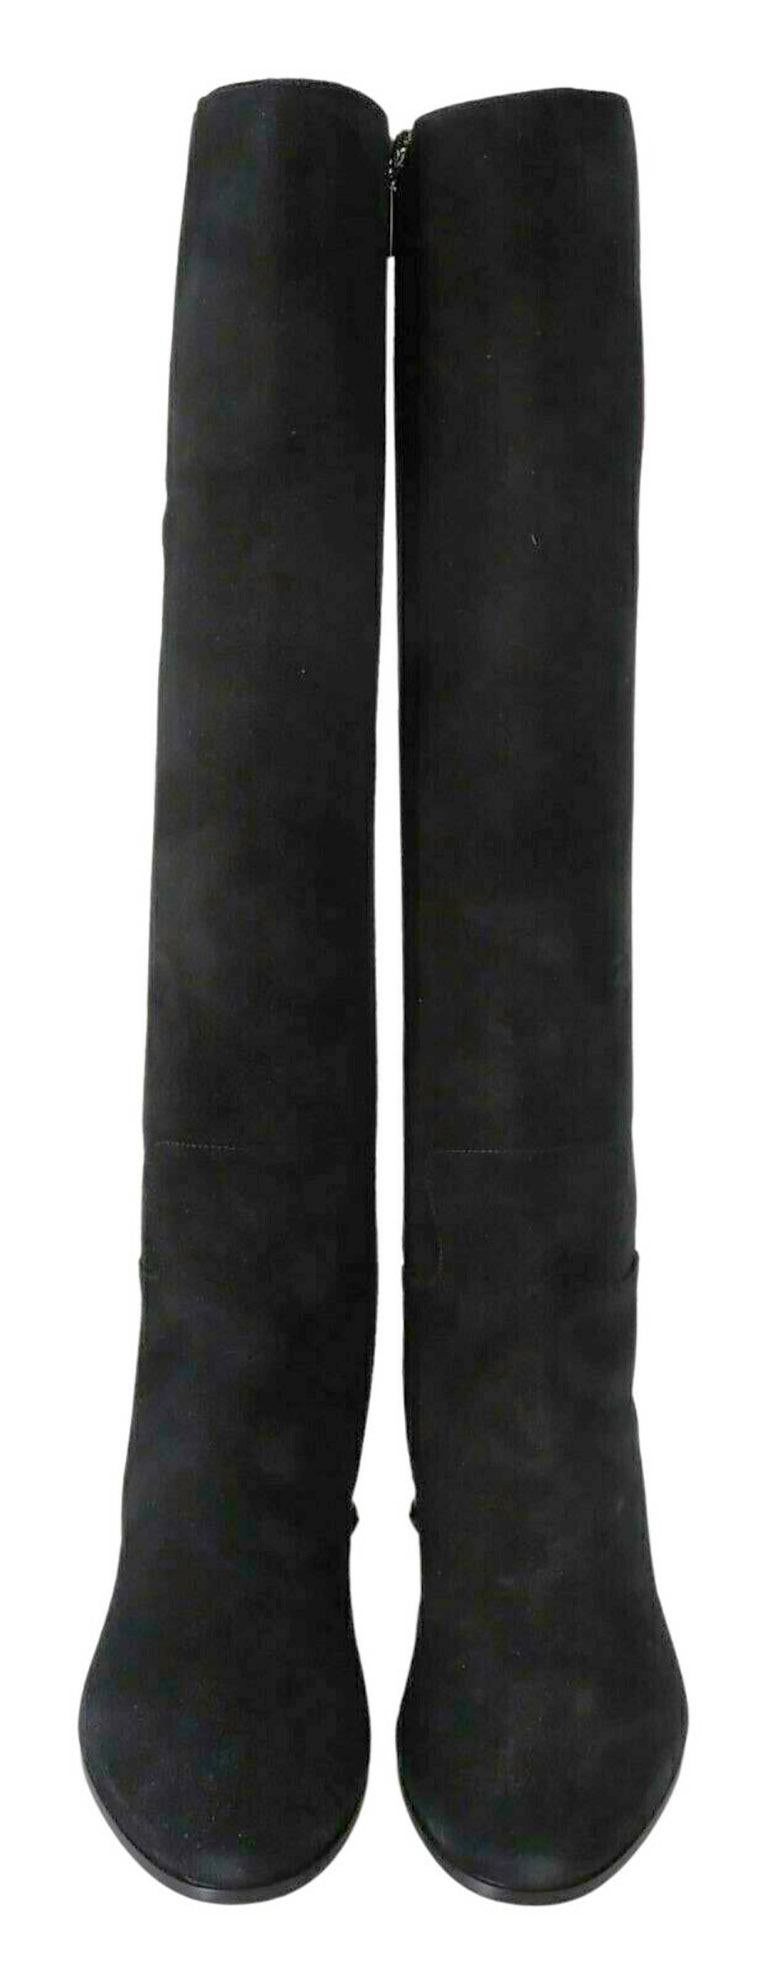 Dolce & Gabbana Black Suede Leather Flat Knee High Boots With Zipper DG Logo For Sale 1